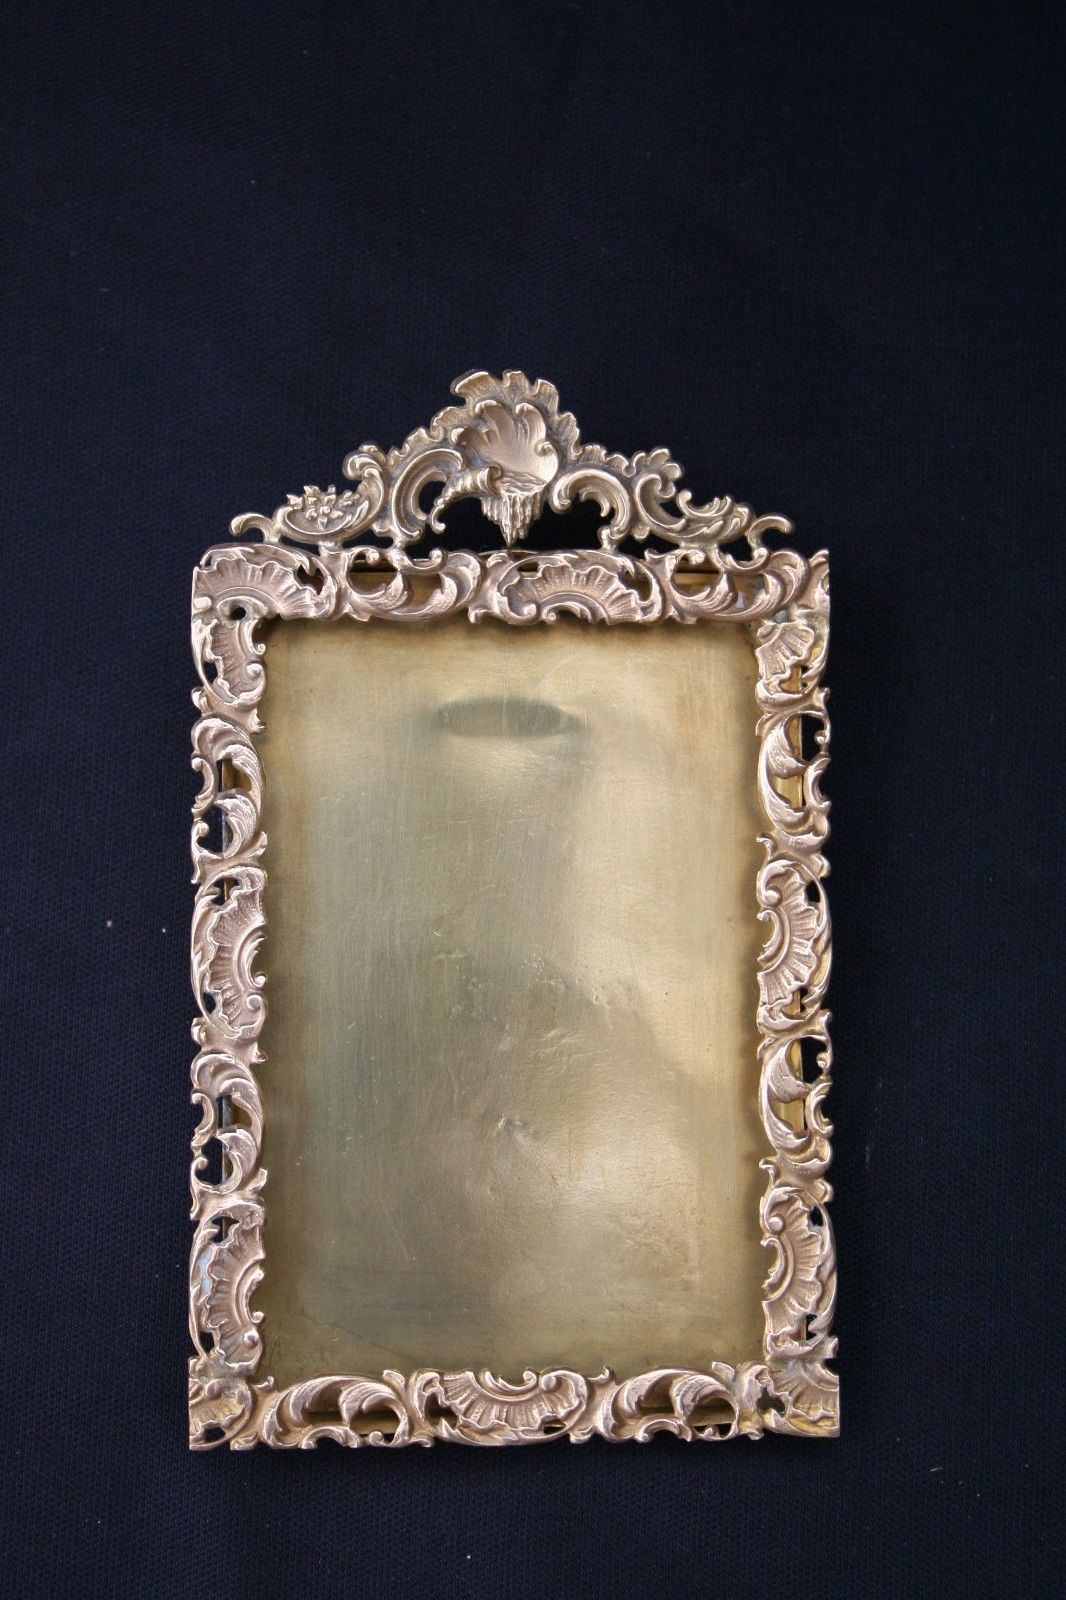 ANTIQUE FRENCH GILT BRONZE SMALL PHOTO FRAME BAROQUE STYLE STAND/HANGING XIXth C